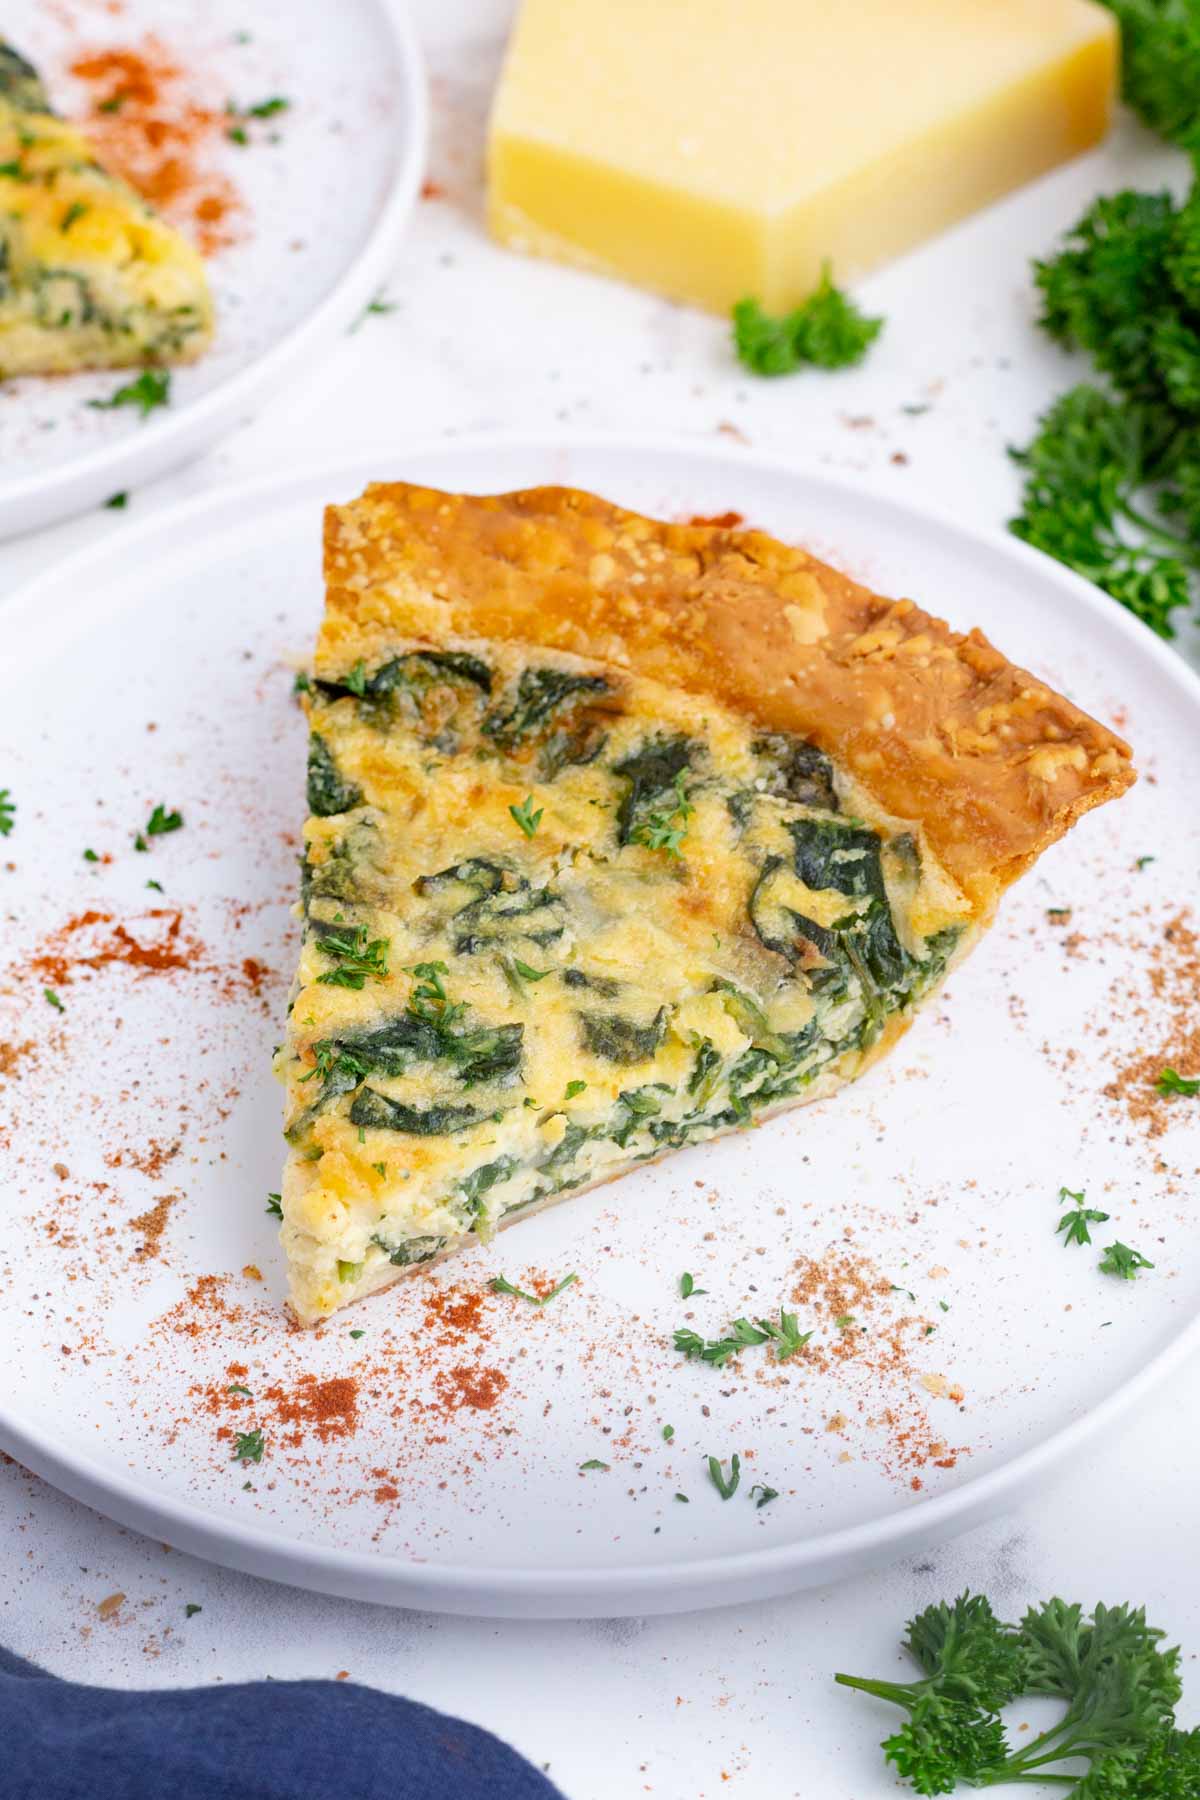 Quiche Florentine is simpler than you think to make with basic pantry staples.